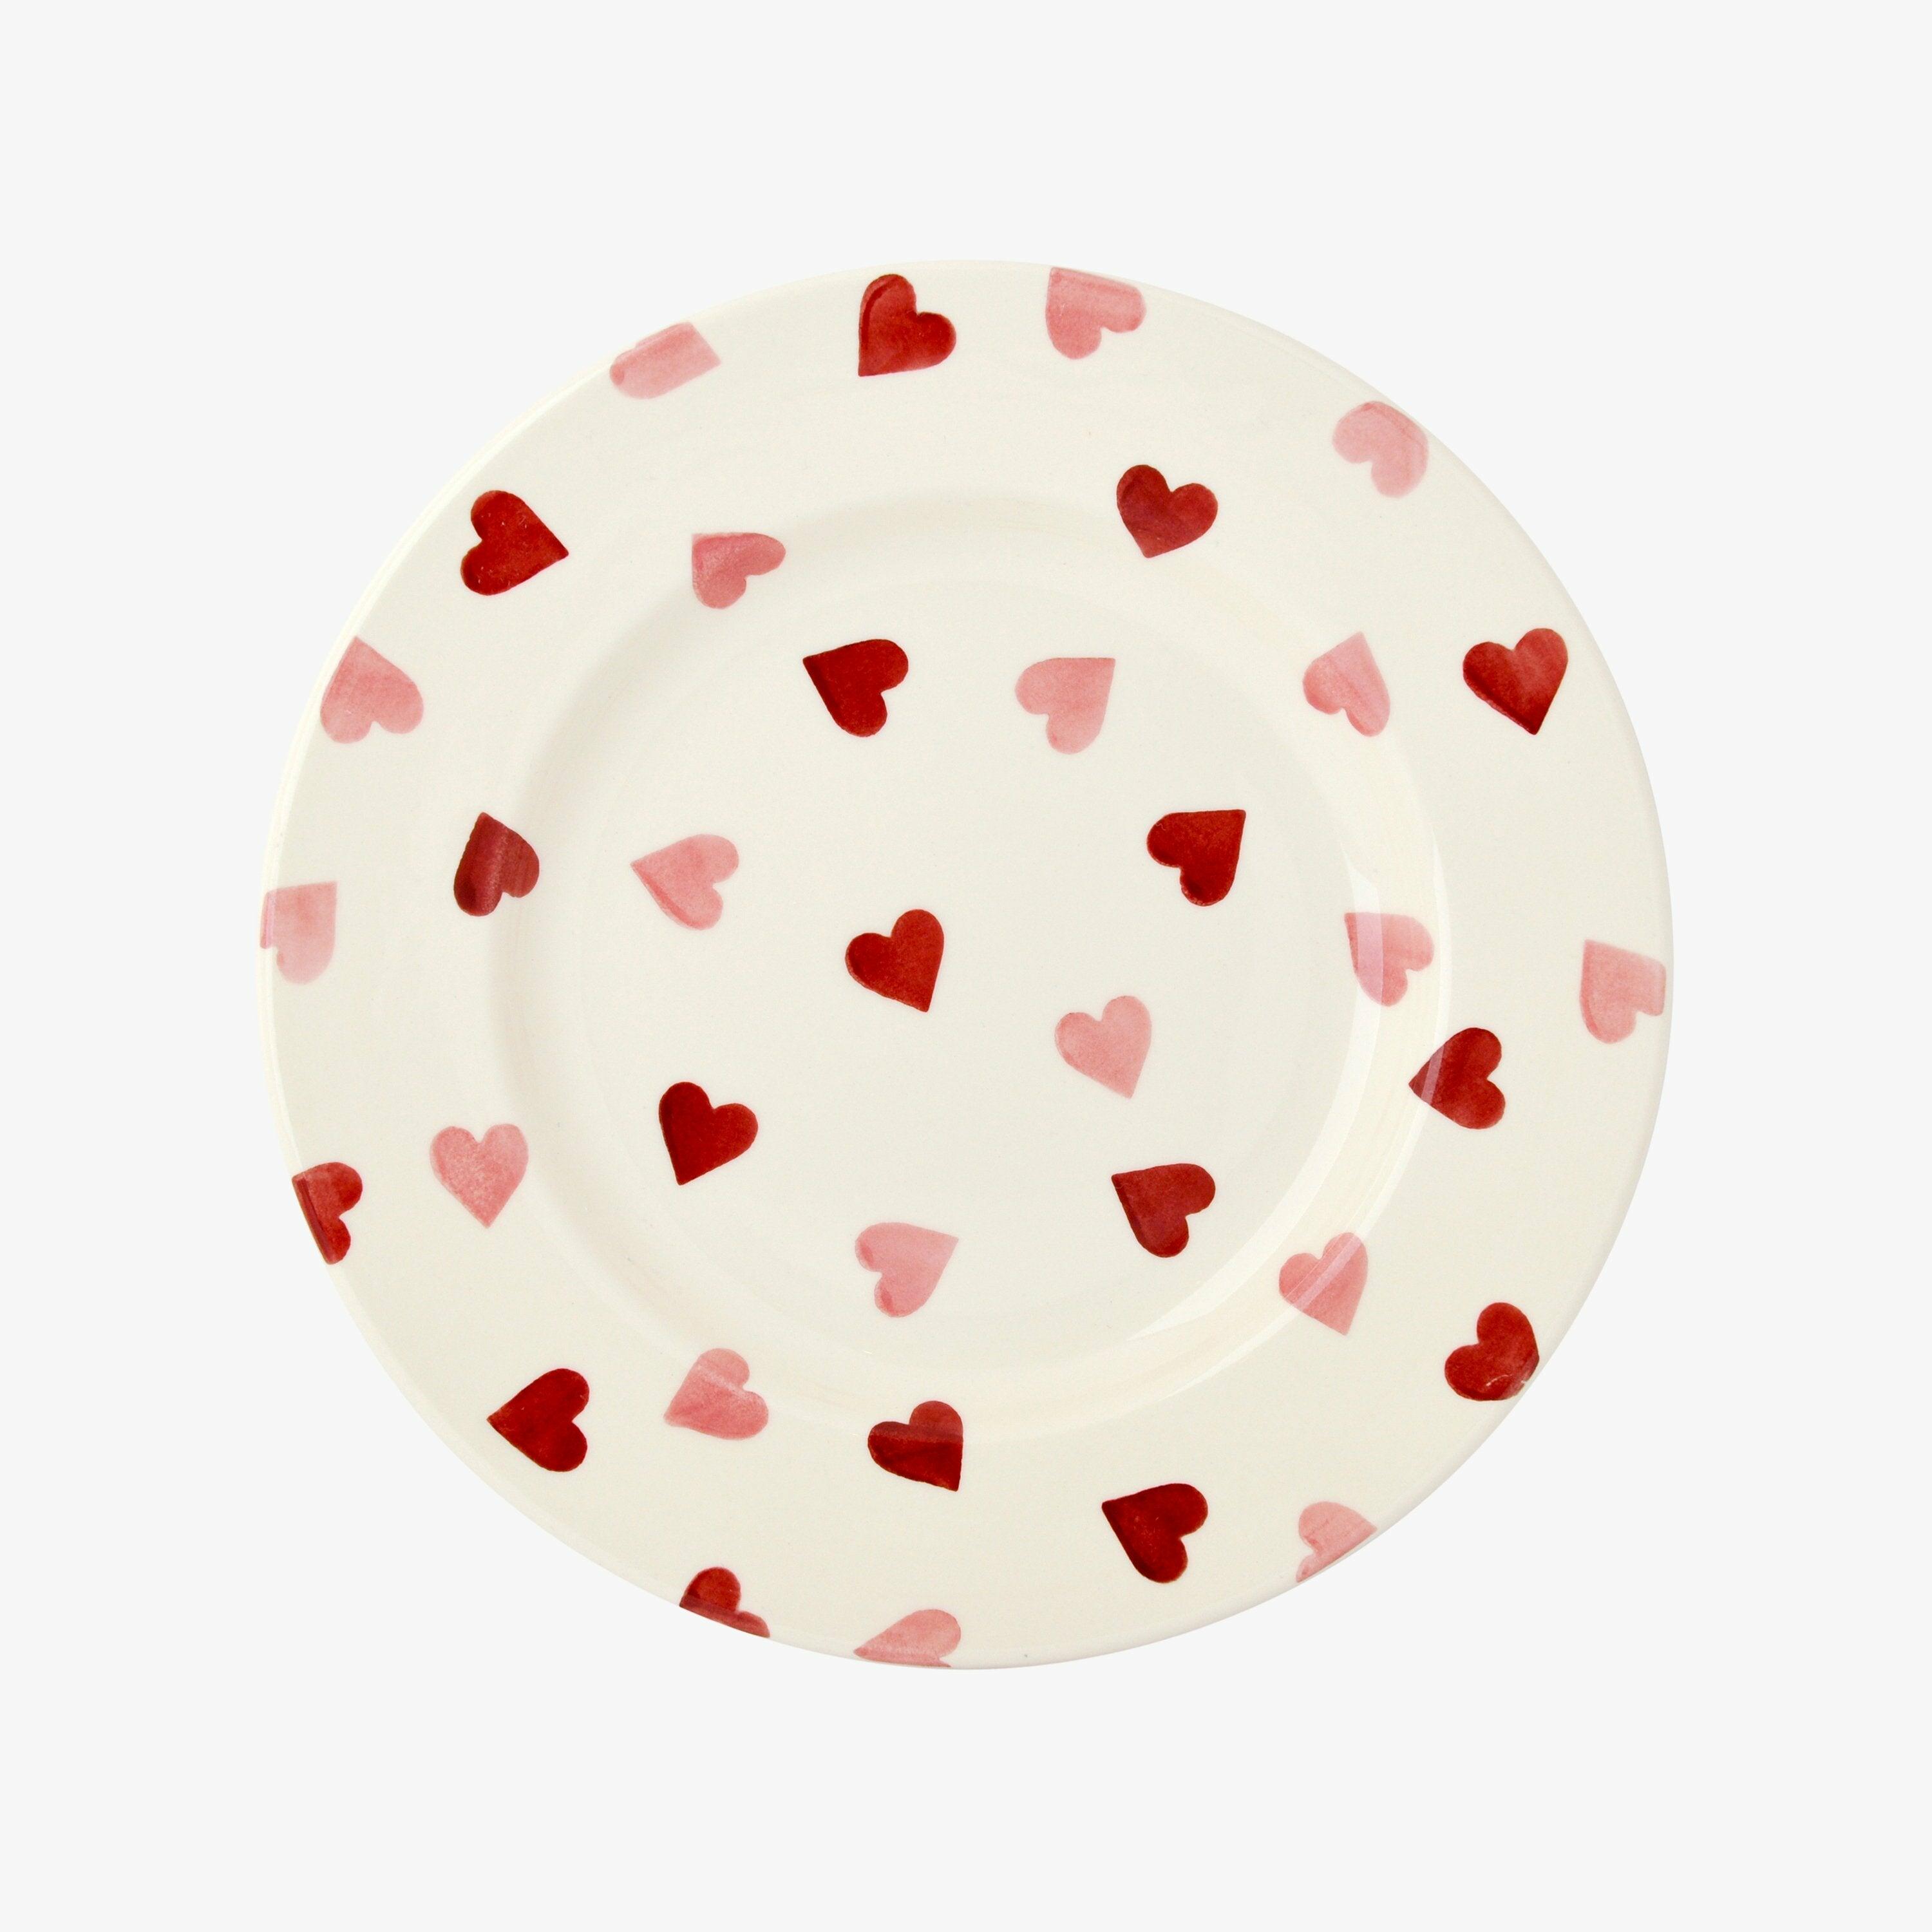 Seconds Pink Hearts 8 1/2 Inch Plate - Unique Handmade & Handpainted English Earthenware British-Made Pottery Plates  | Emma Bridgewater